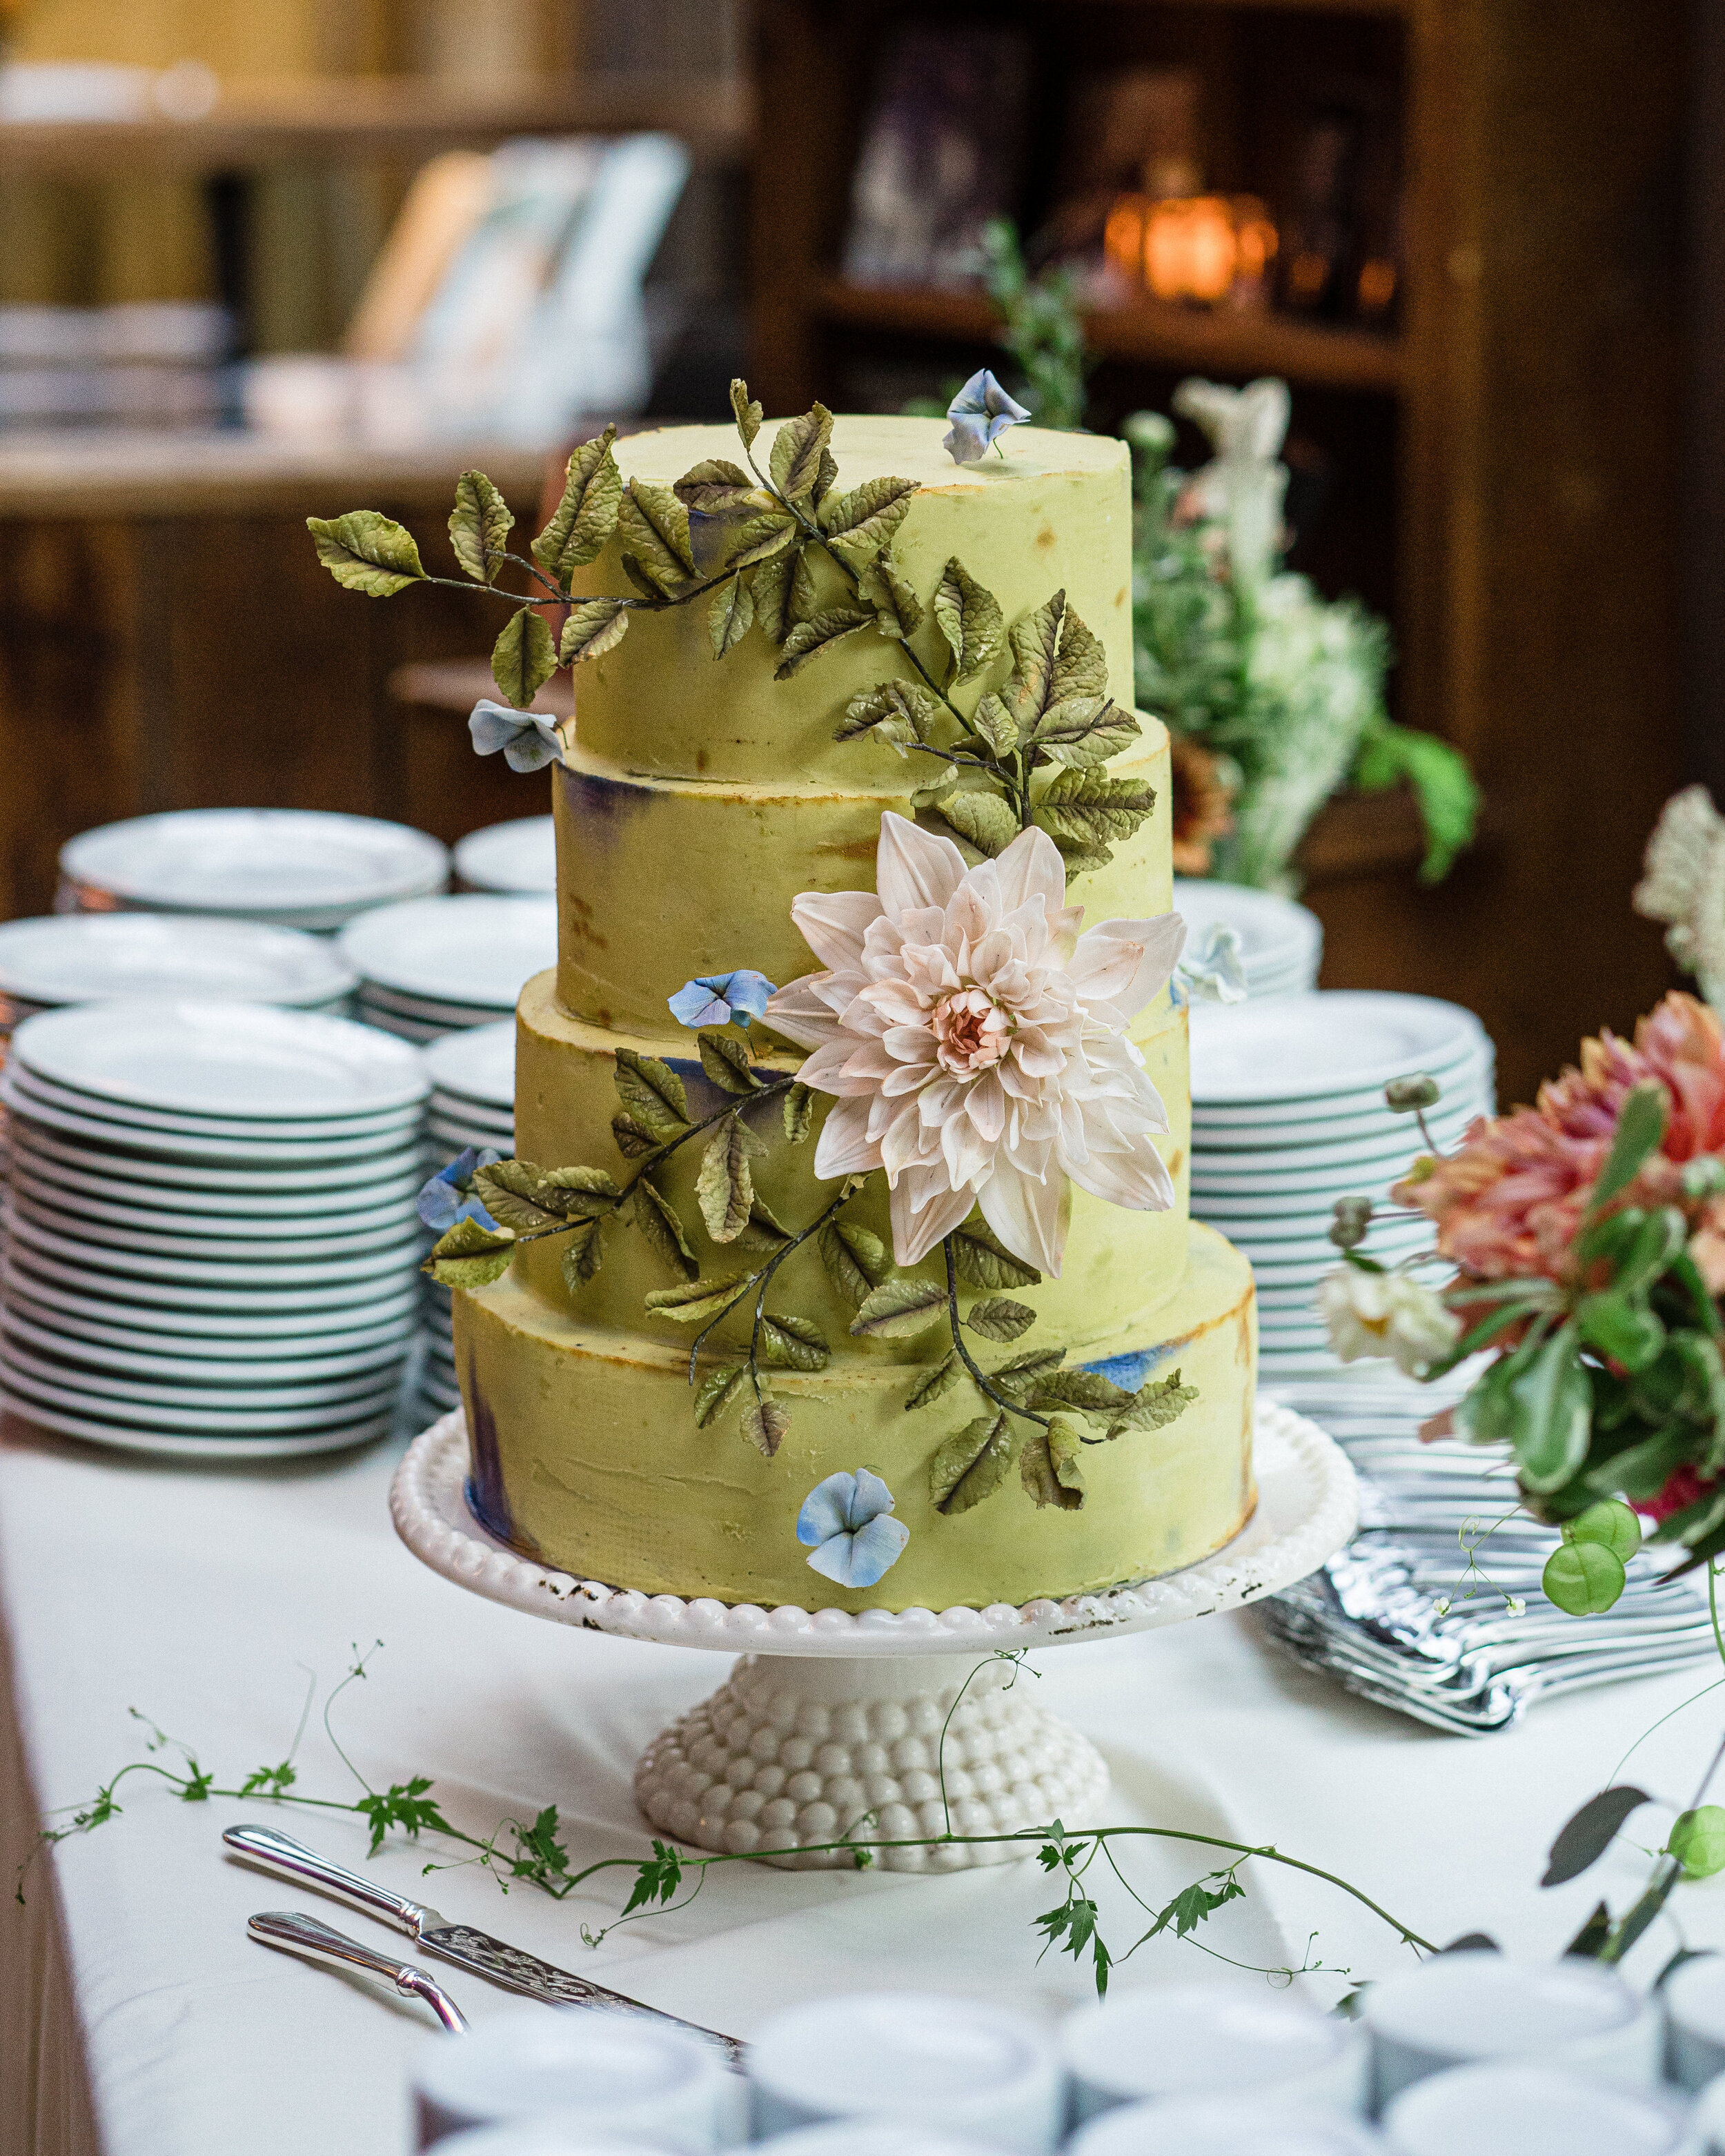 Photo By Michael Tallman Photography / Cake by Mamie Brougitte Cakes